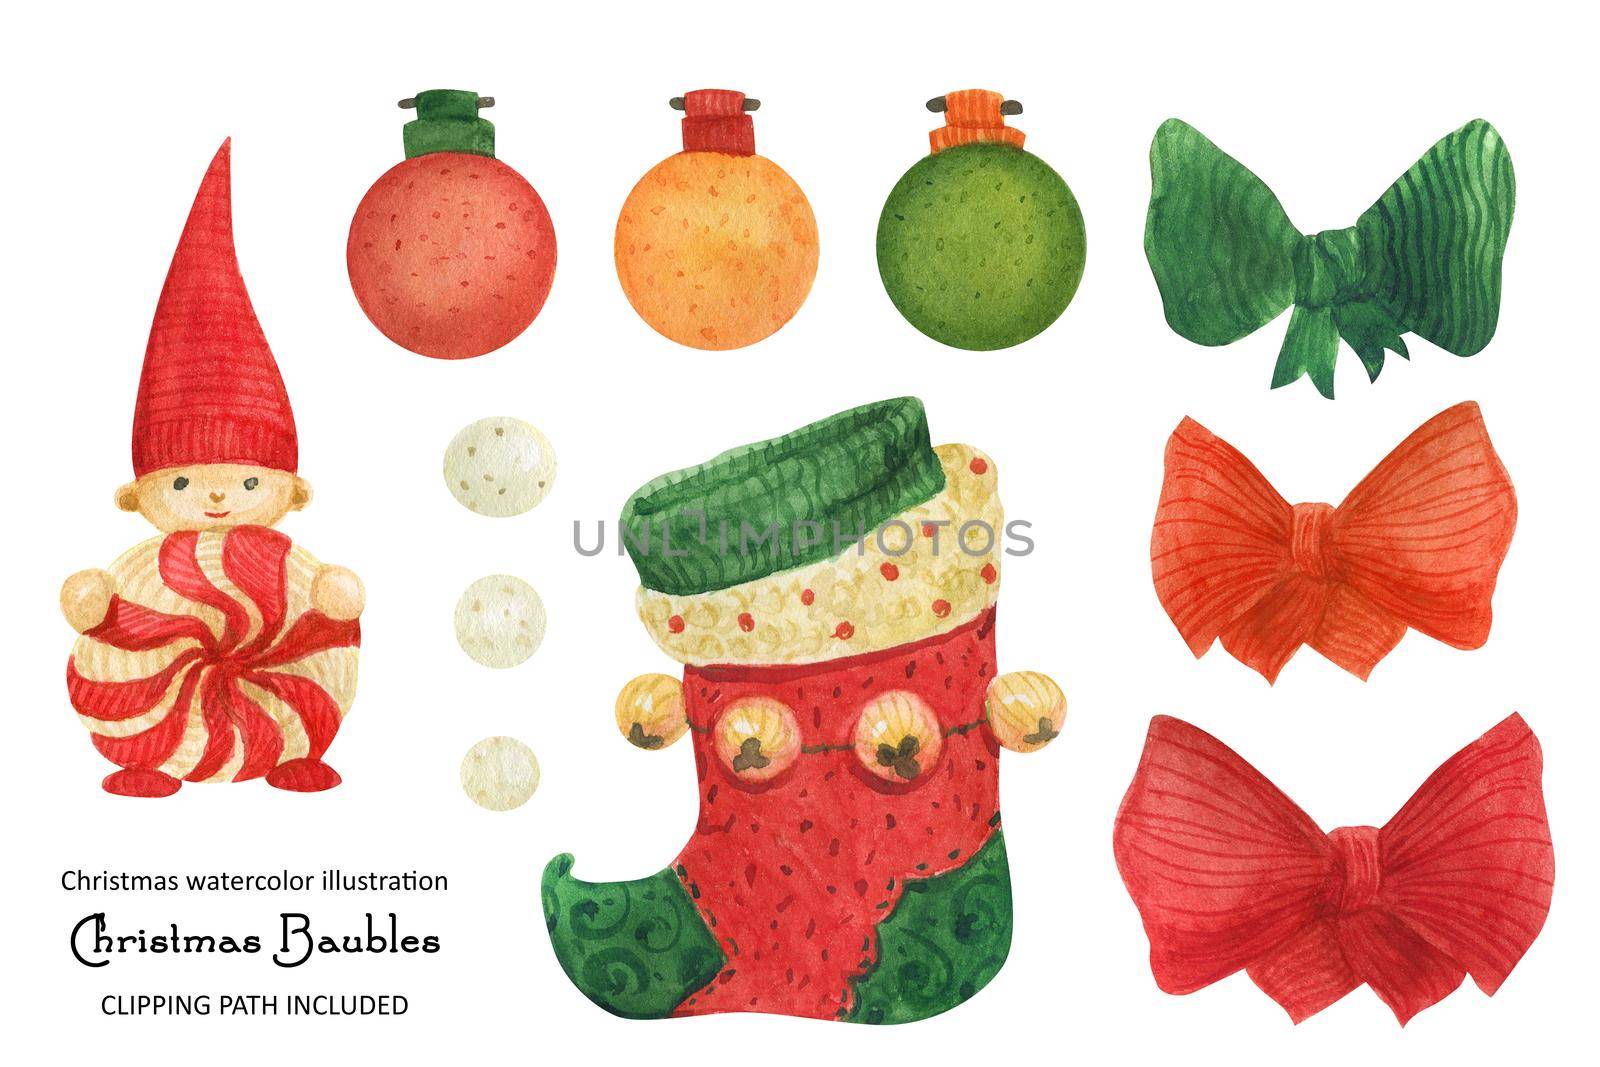 Christmas baubles, watercolor illustration by Xeniasnowstorm